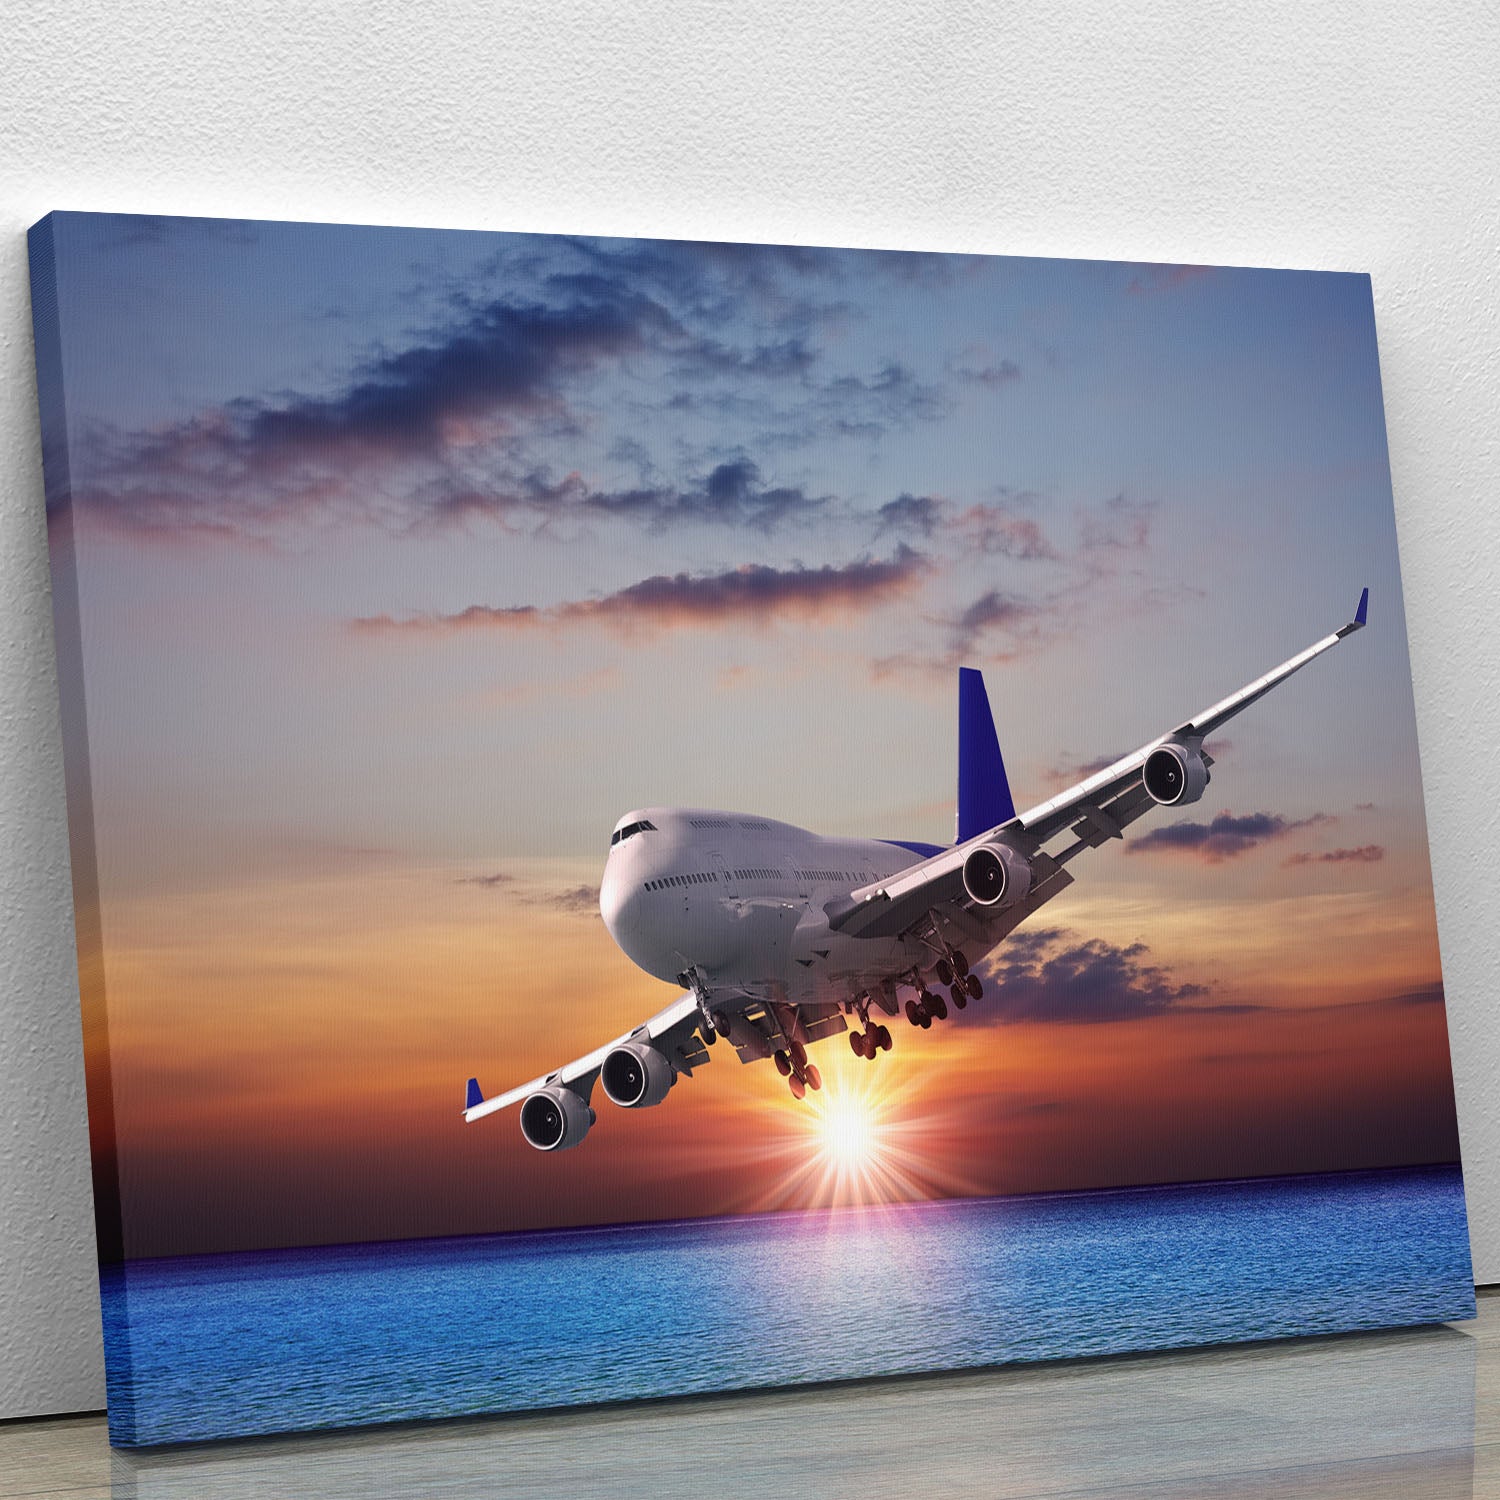 Jet liner over the sea at dusk Canvas Print or Poster - Canvas Art Rocks - 1